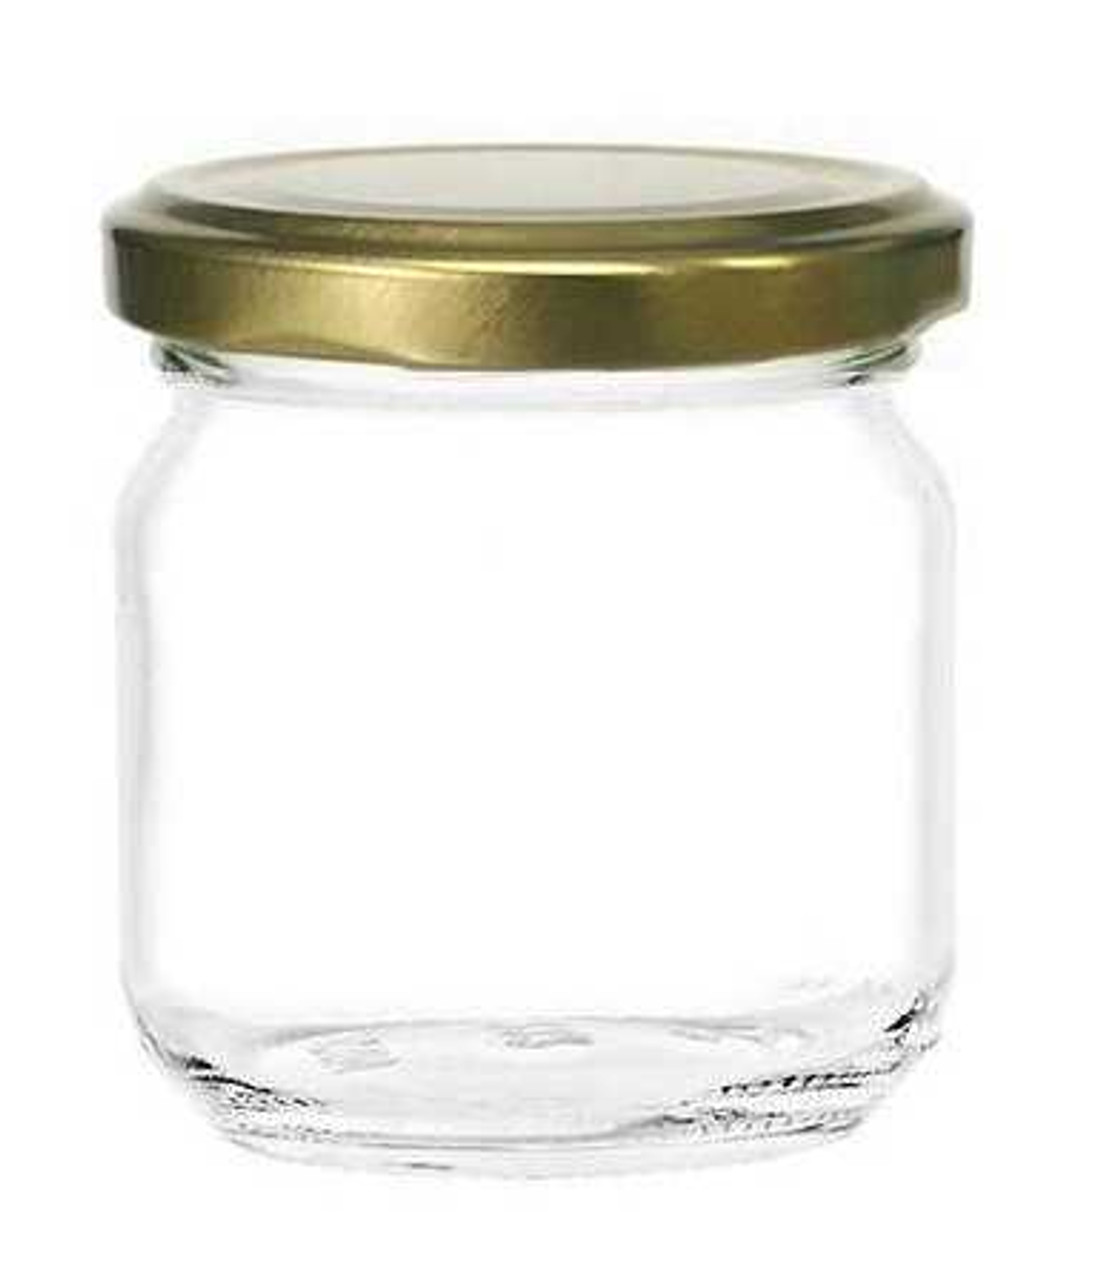 12 Square Clear Glass Bottles Containers Jars 4oz with Gold Metal Lids and  Shaker Tops Empty